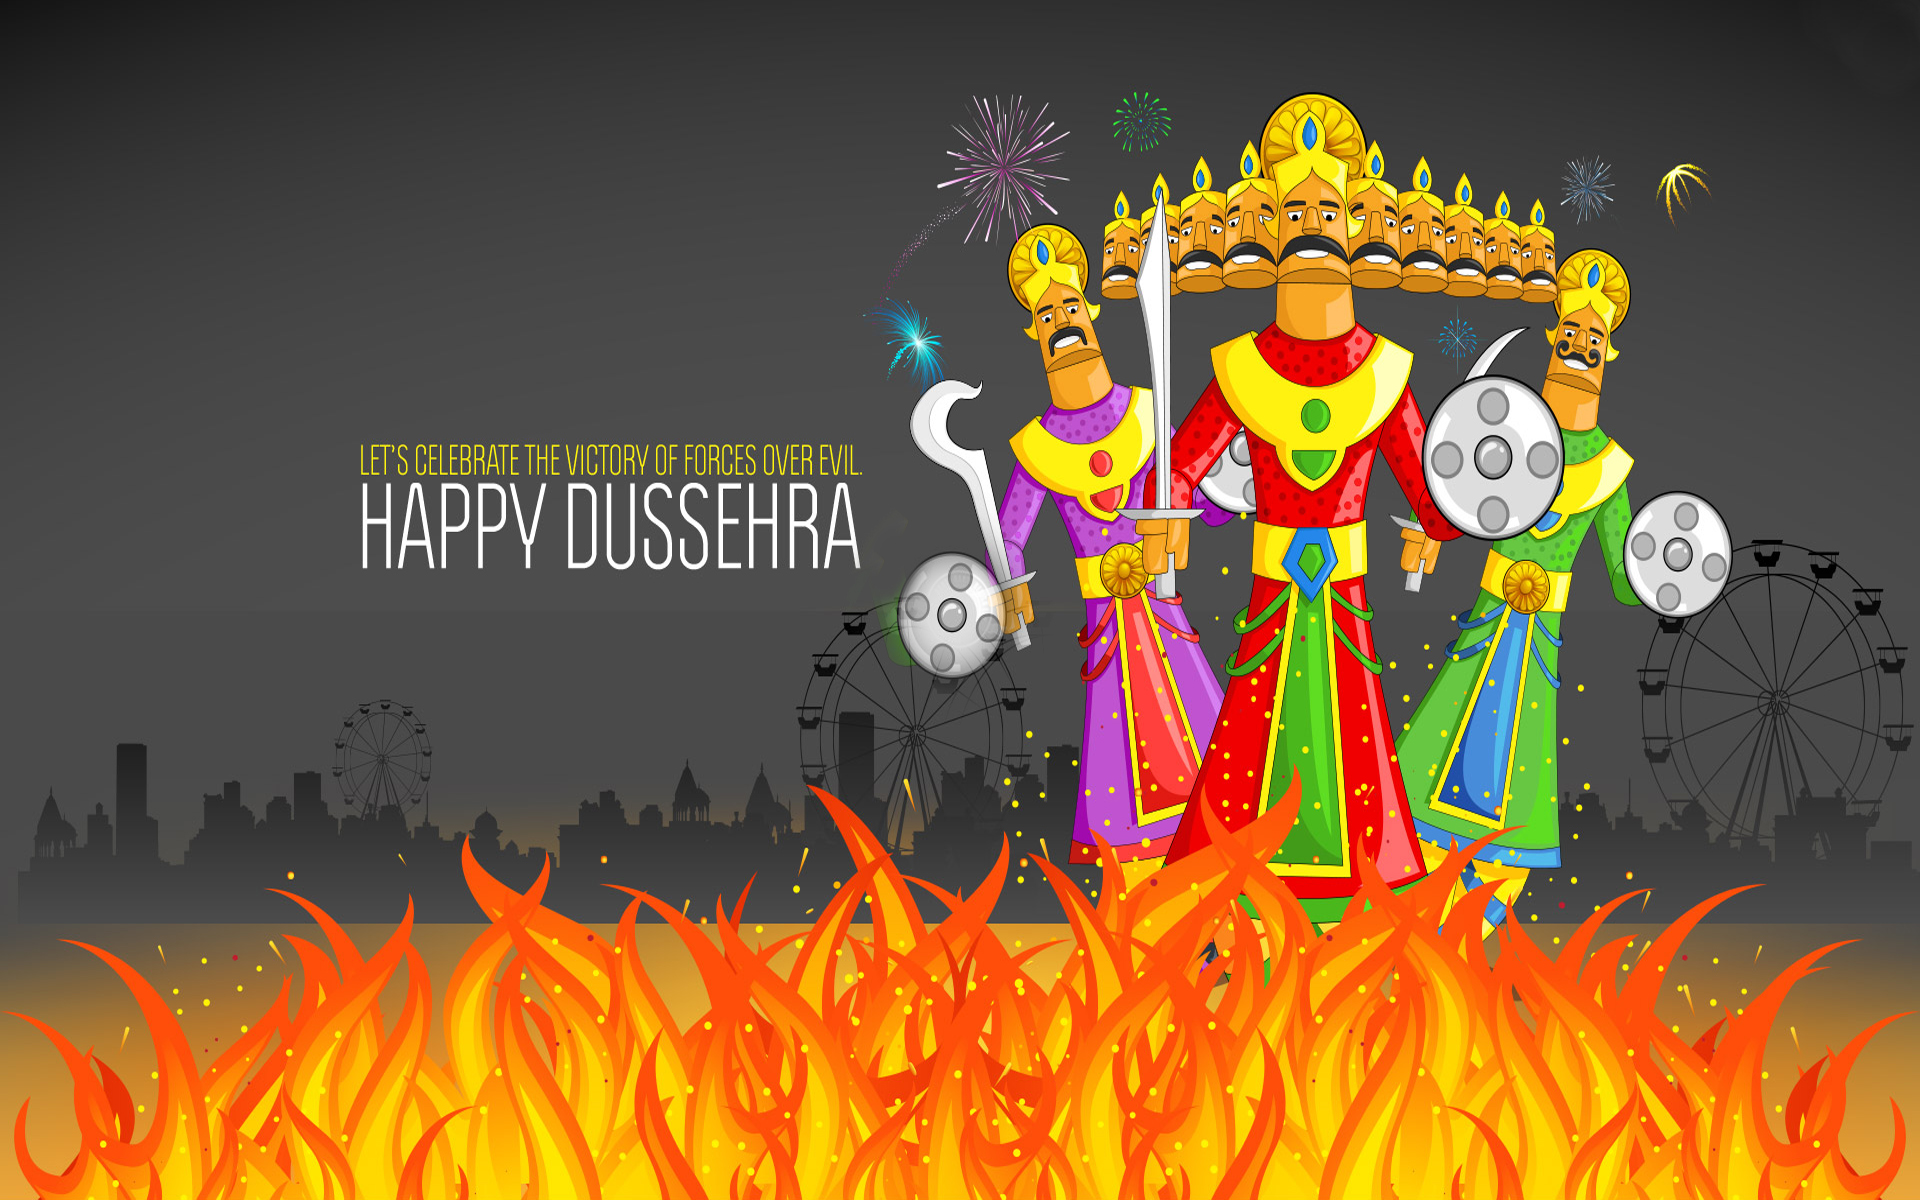 happy dussehra wishes images 